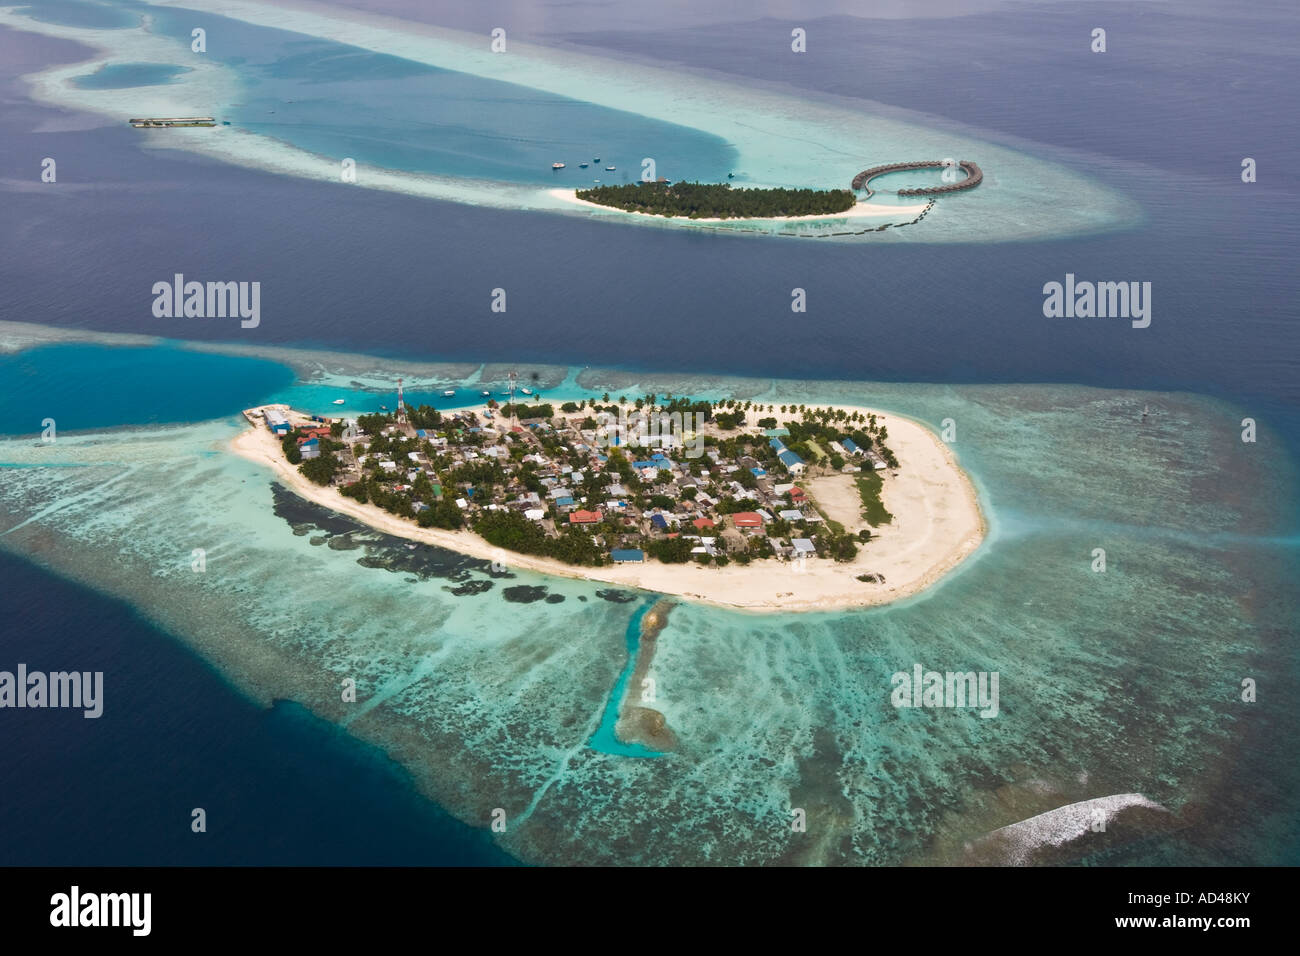 Island and the Resort Vilu Reef in the south Nilandhe atoll, the Maldives. Stock Photo